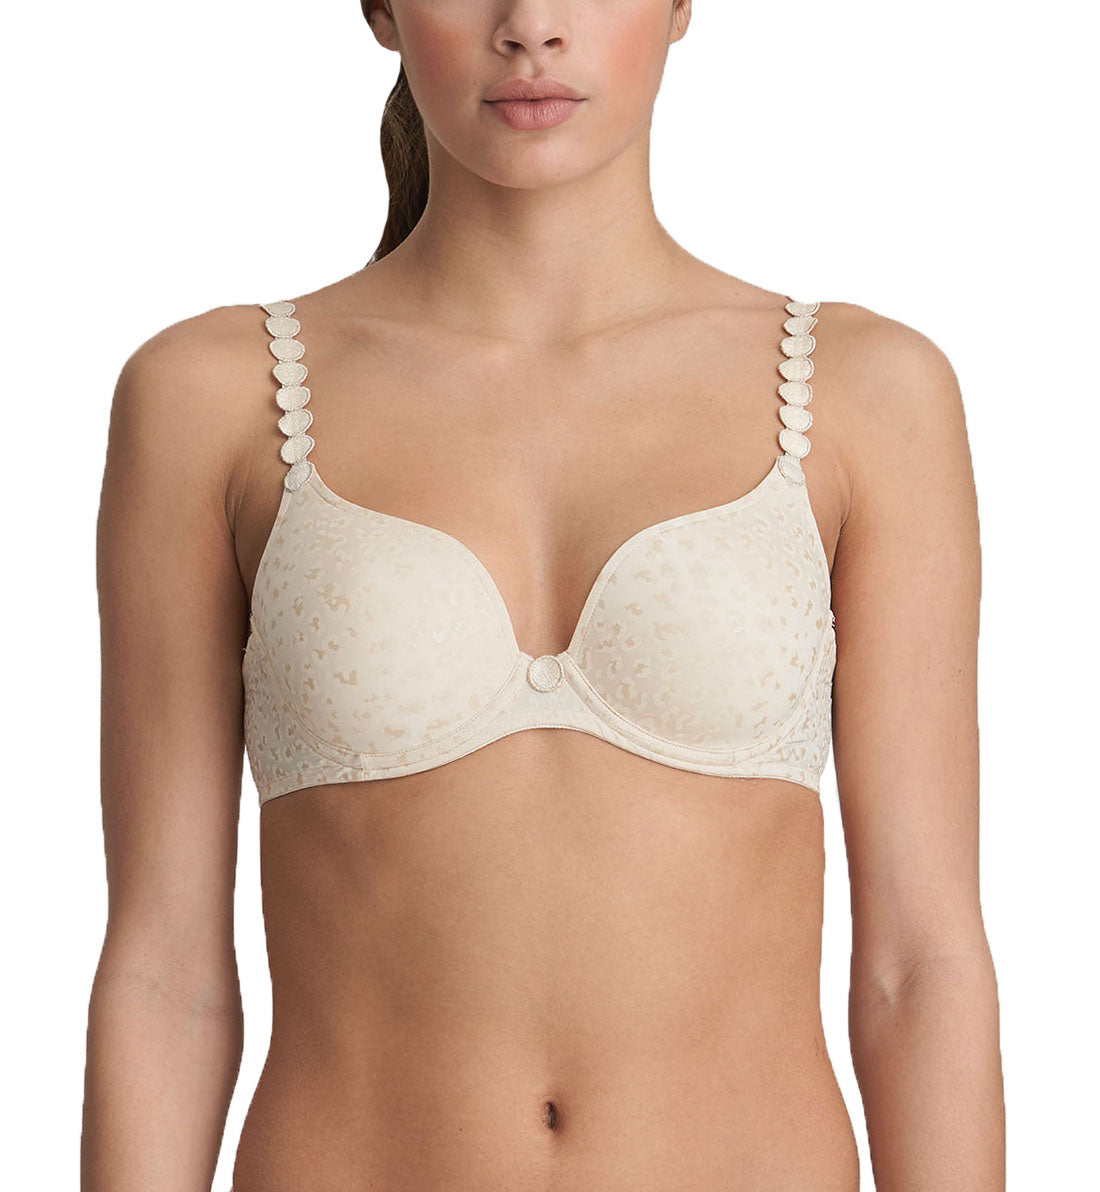 Marie Jo Tom Convertible Seamless Underwire Bra (0120826),32A,Pearled Ivory - Pearled Ivory,32A